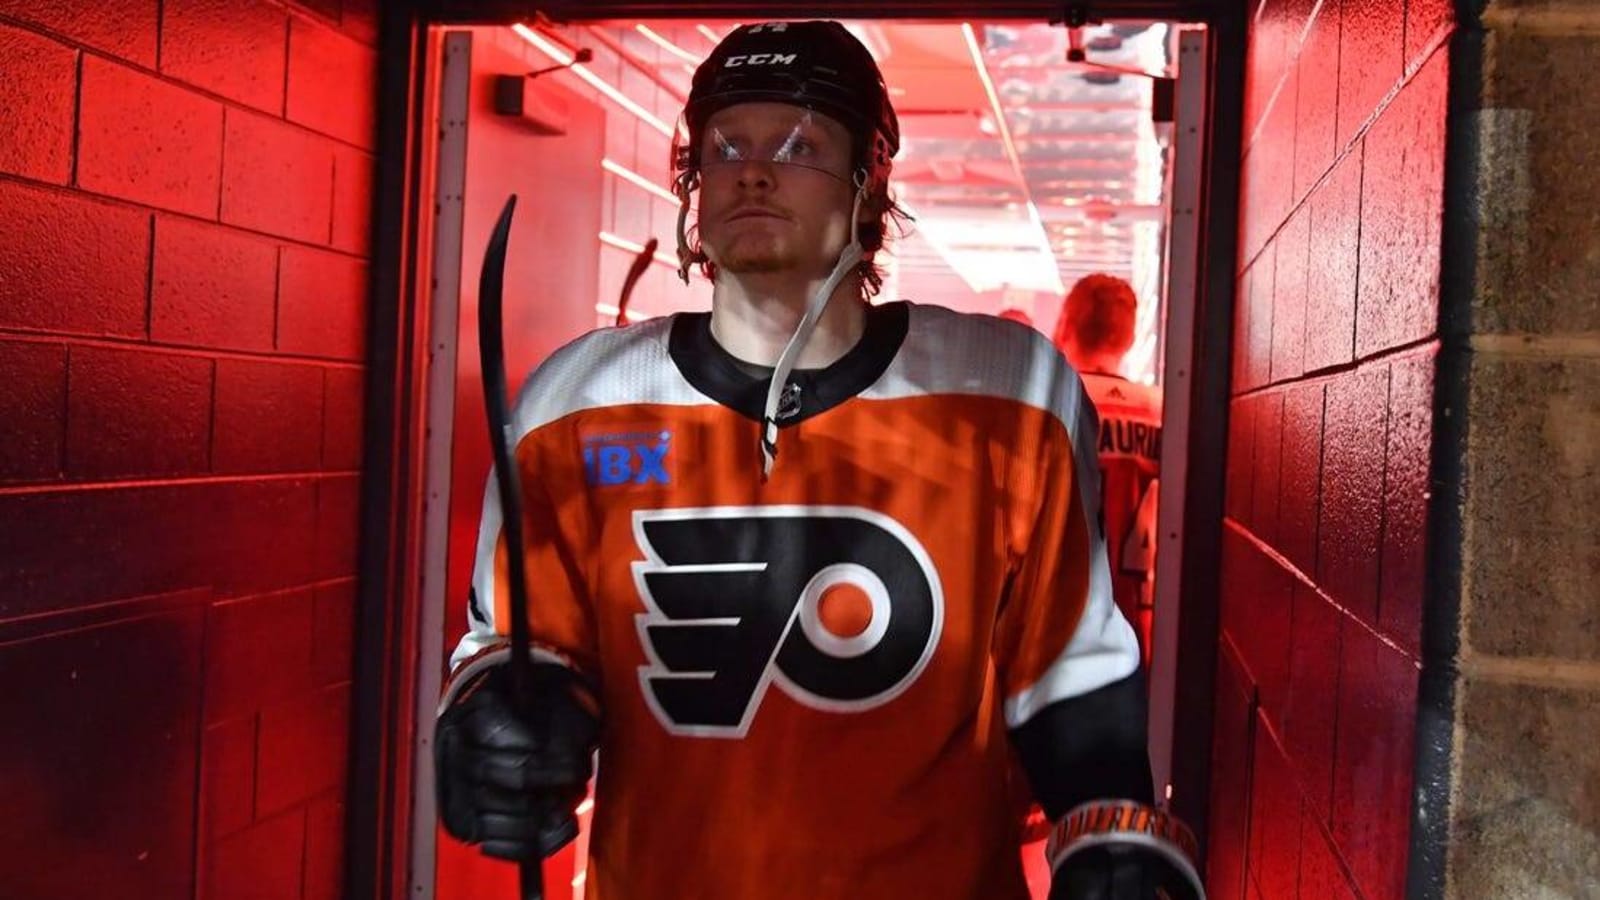 Report: Flyers F Owen Tippett close to signing 8-year extension